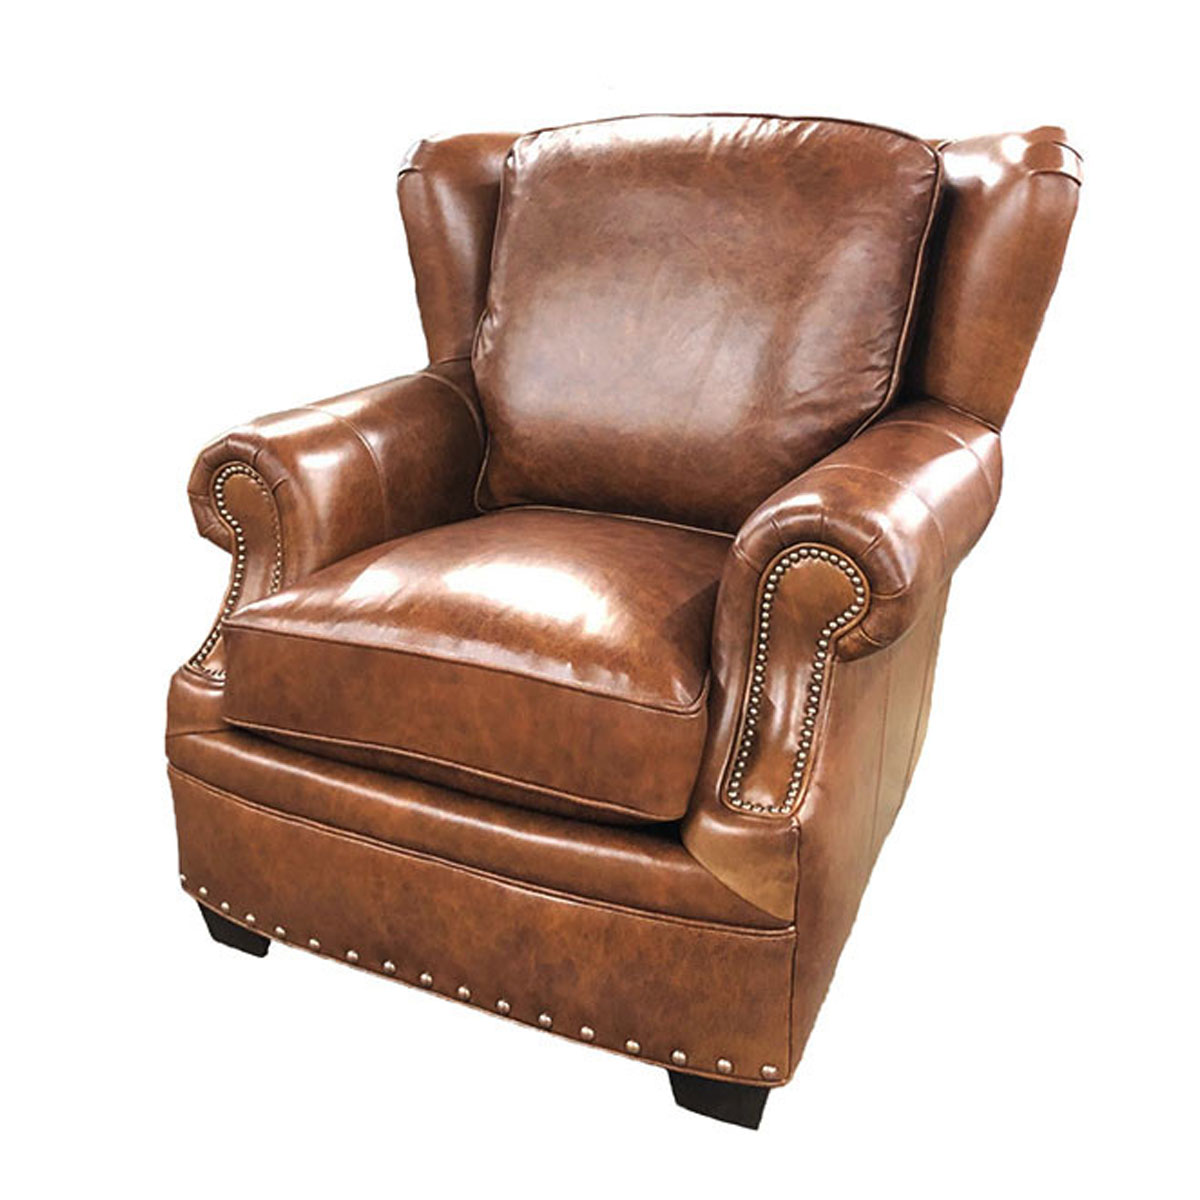 1989 Greenbriar Chair by CC Leather